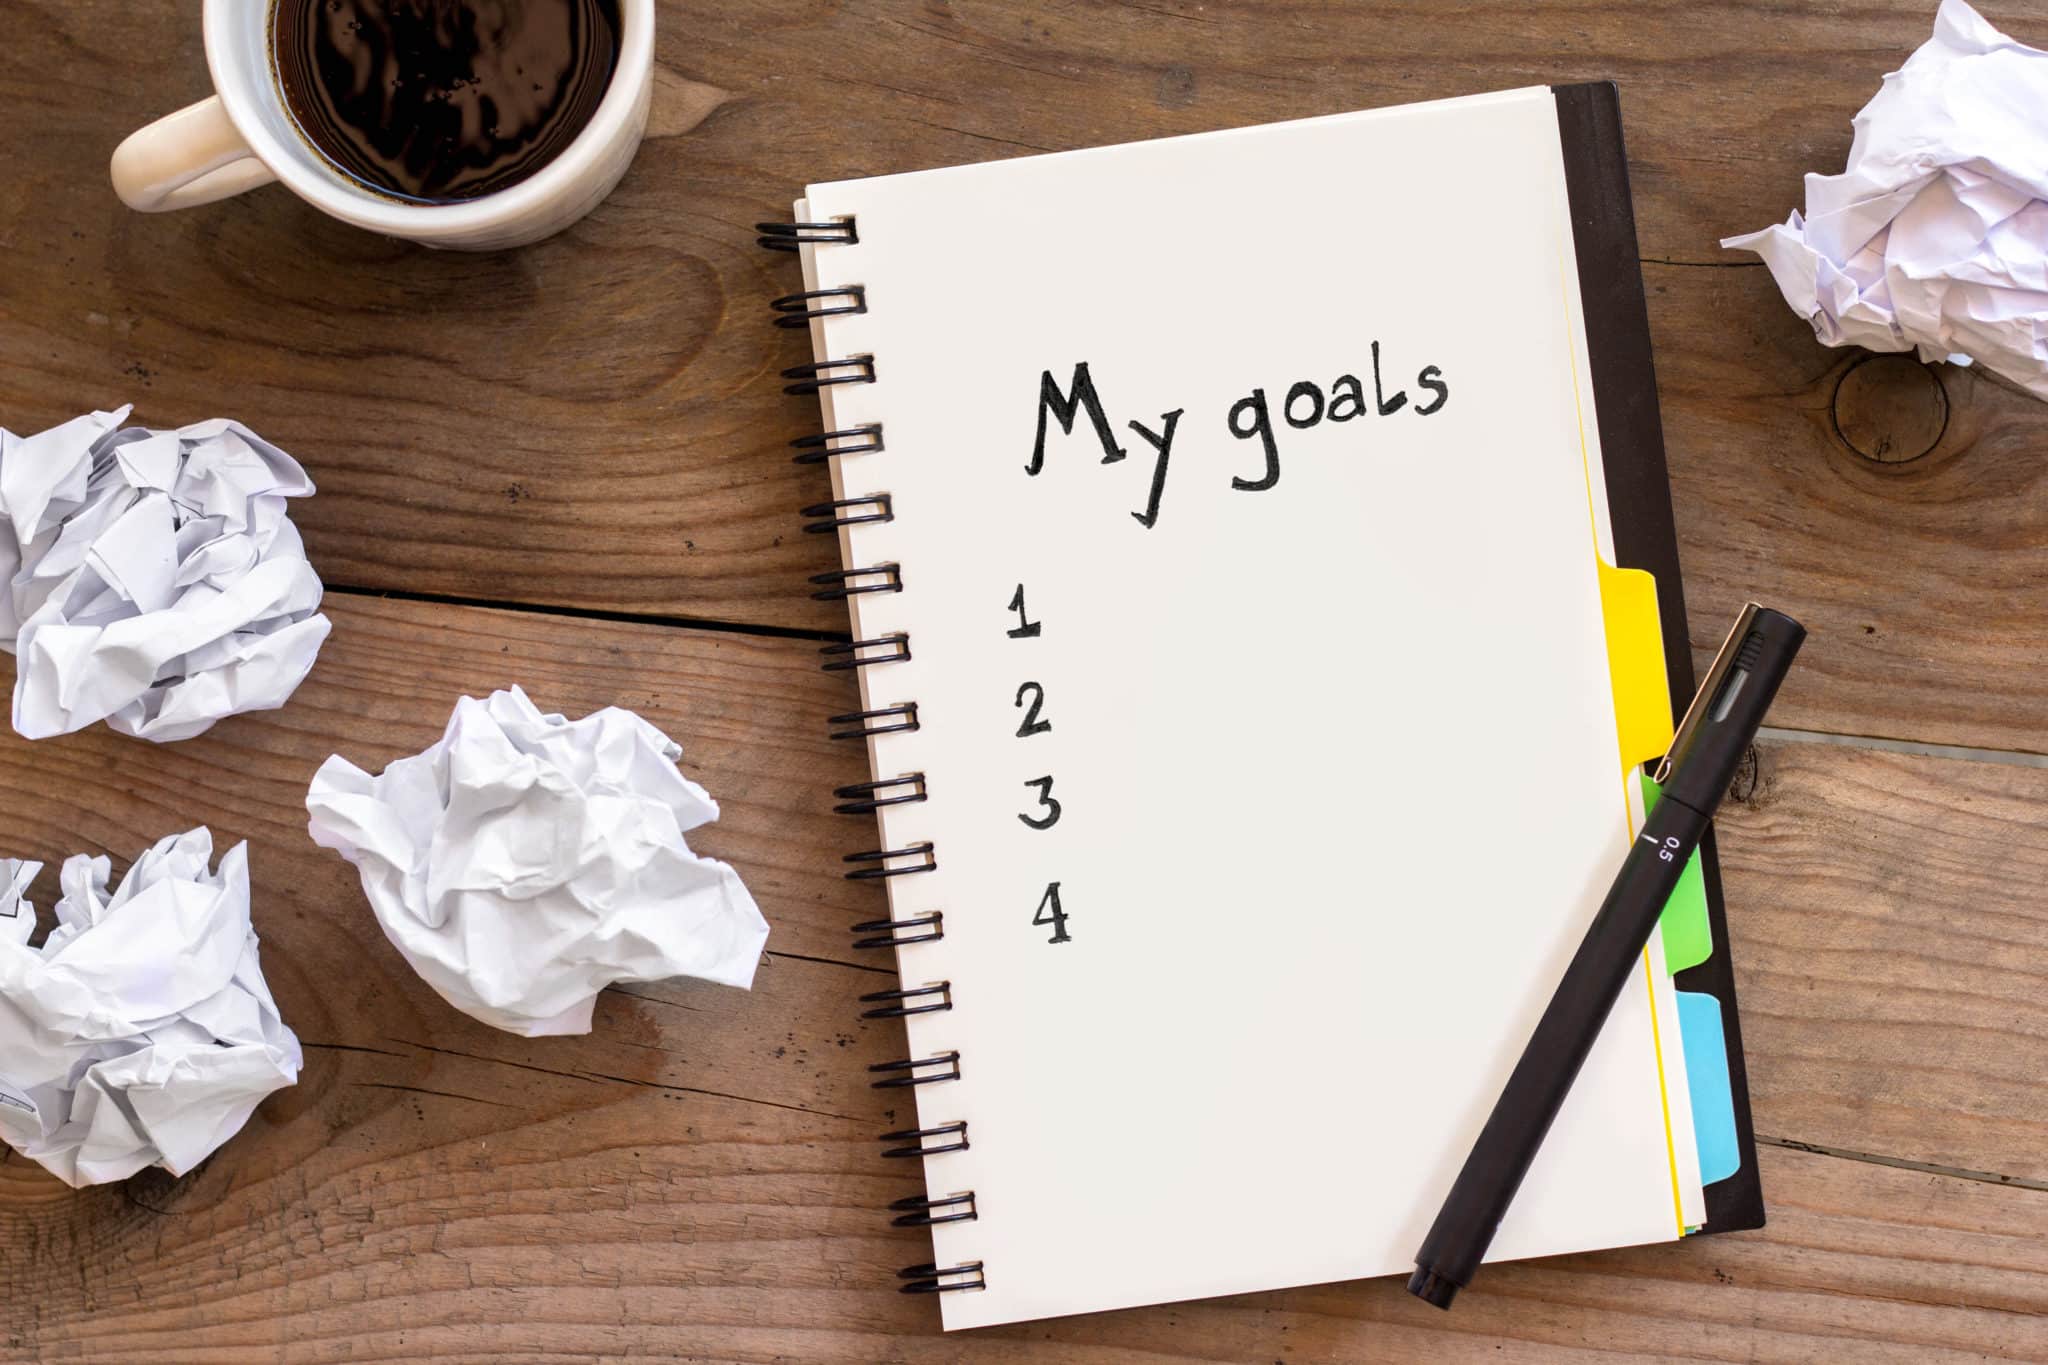 A notebook with "my goals" written across the top on wooden table with cup of coffee